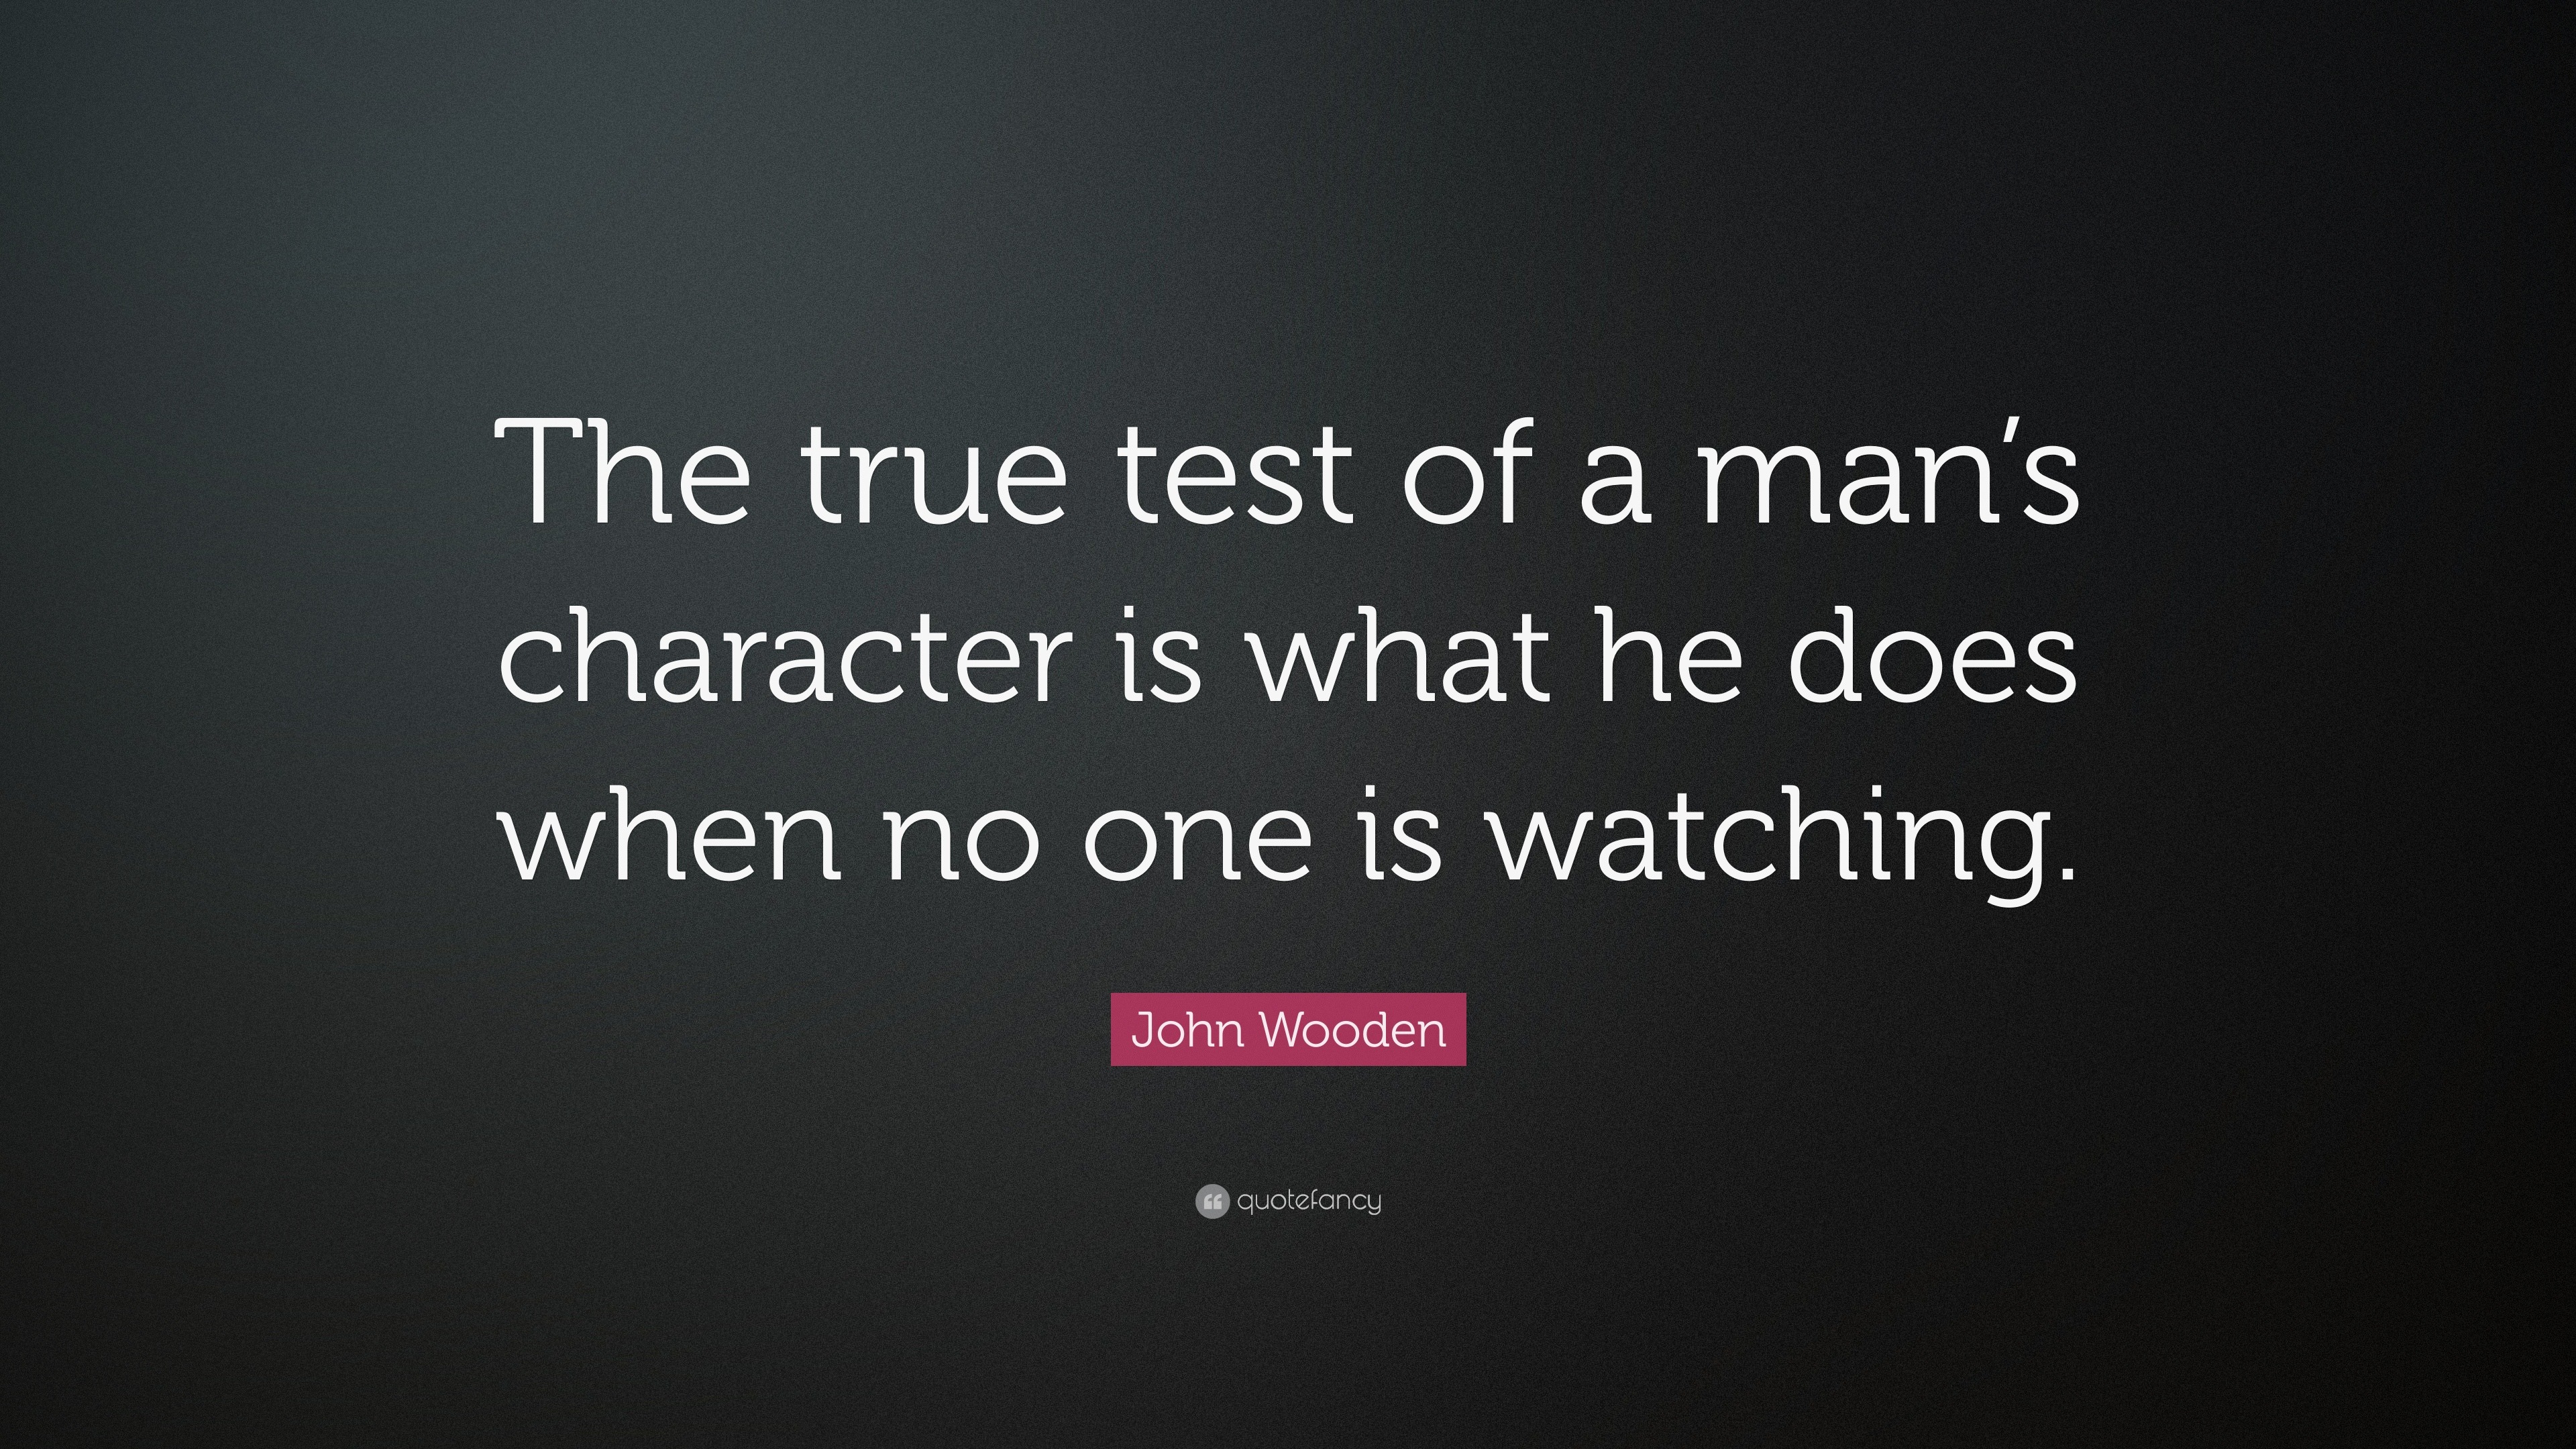 John Wooden Quote: “The true test of a man’s character is what he does